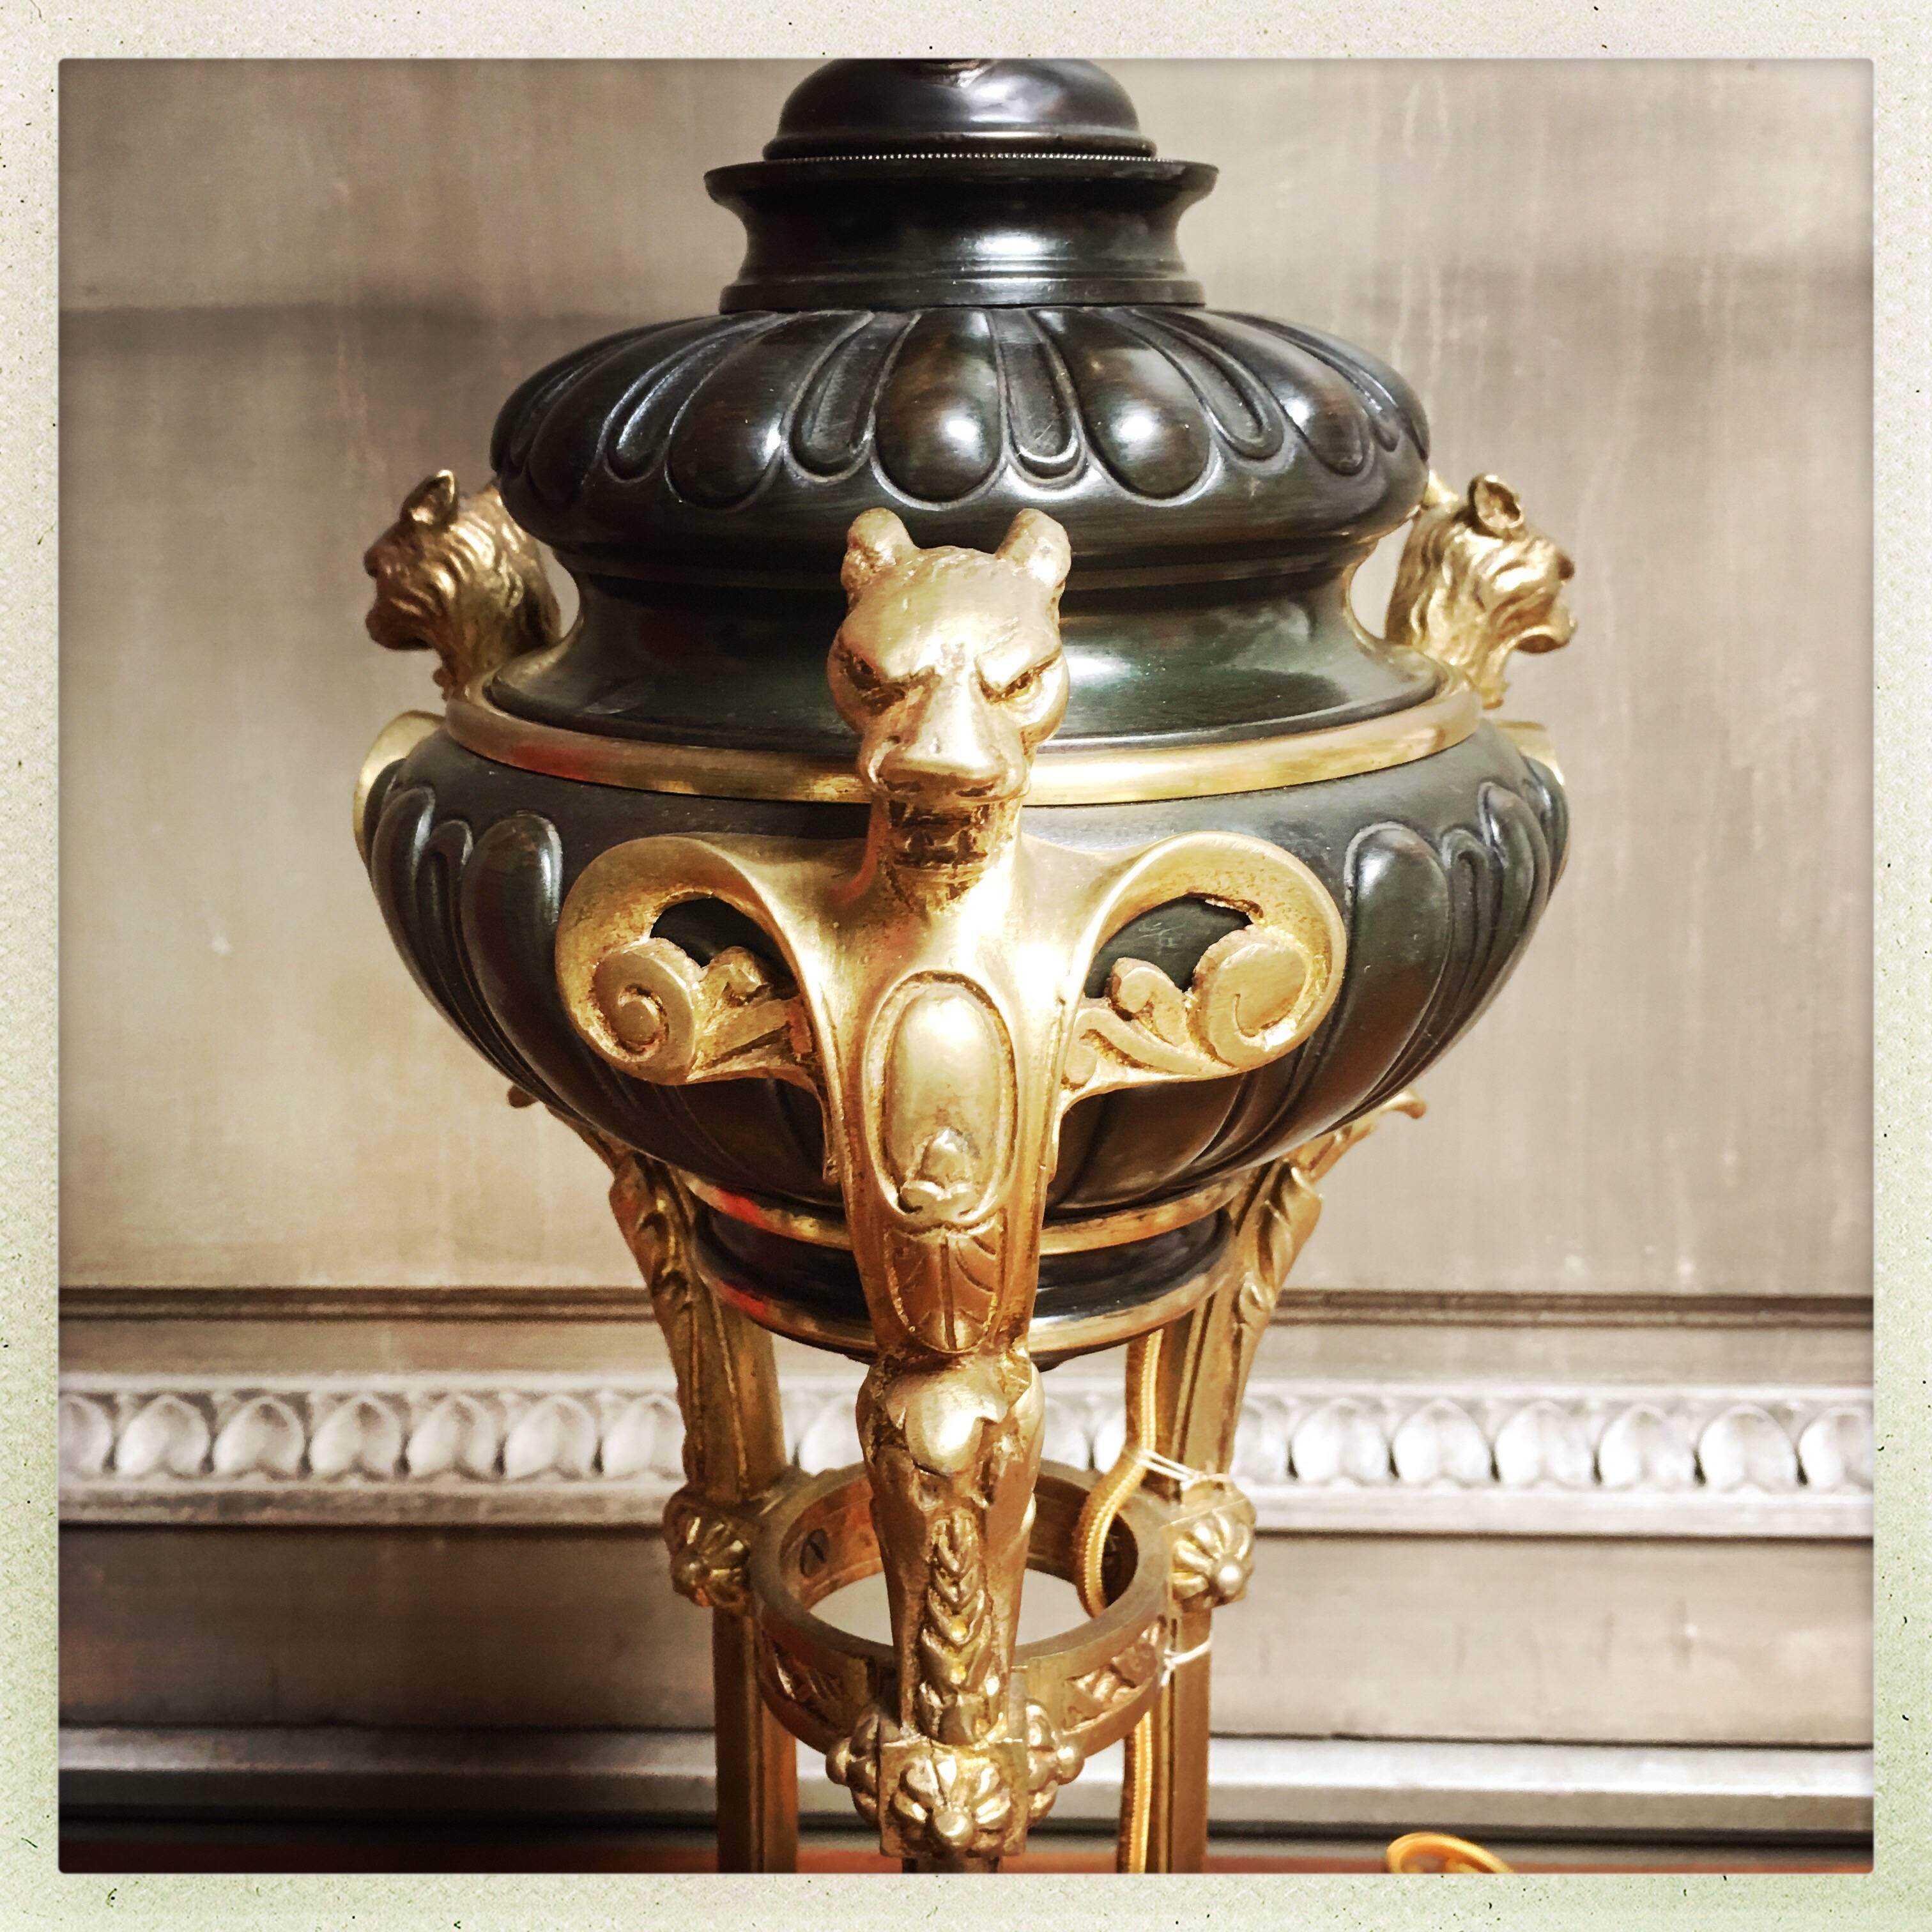 A French Empire Revival bronze lamp base with lioness motif.